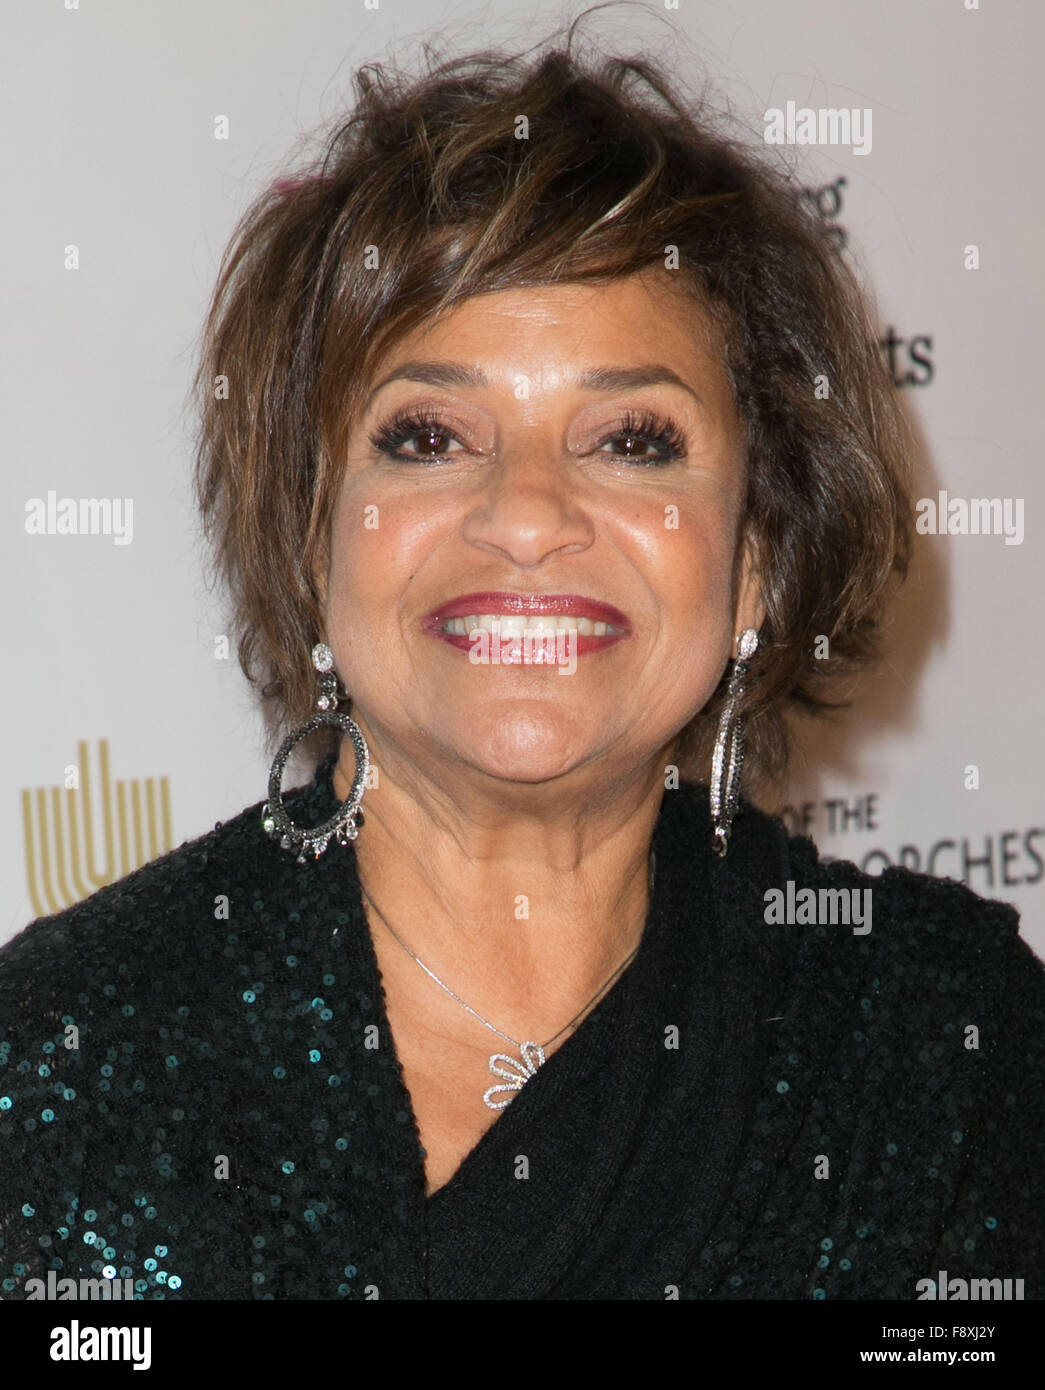 Celebrities attend The Wallis Annenberg Center for the Performing Arts and the American Friends of the Israel Philharmonic Orchestra’s “Duet Gala” at Wallis Annenberg Center for the Performing Arts in Beverly Hills.  Featuring: Debbie Allen Where: Los Ang Stock Photo